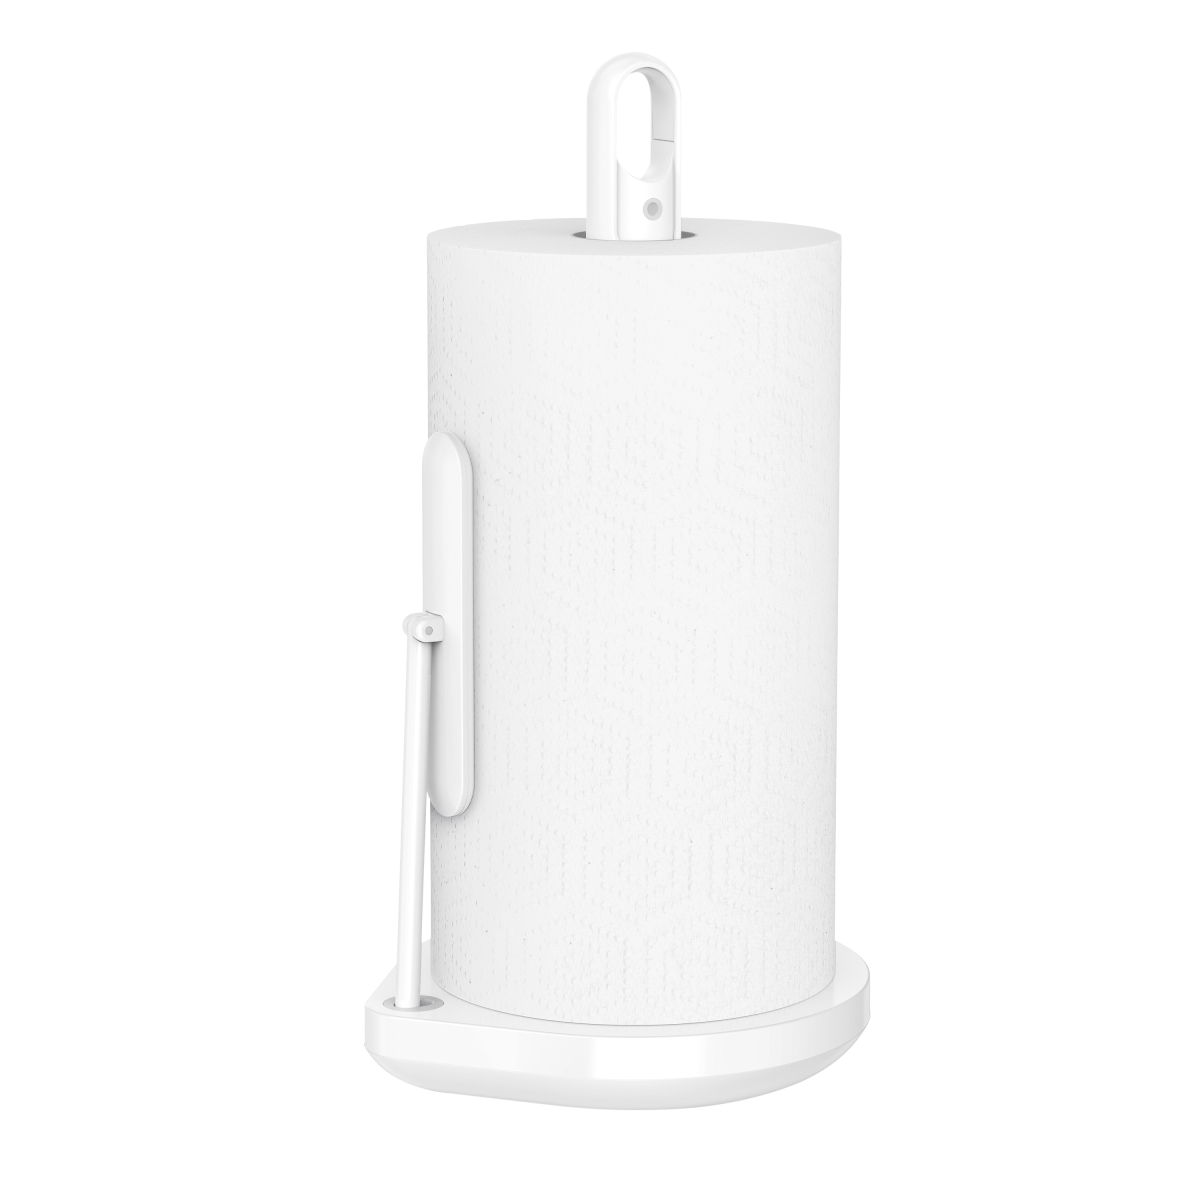 https://www.containerstore.com/catalogimages/518104/10093170-sh-paper-towel-spray-pump-w.jpg